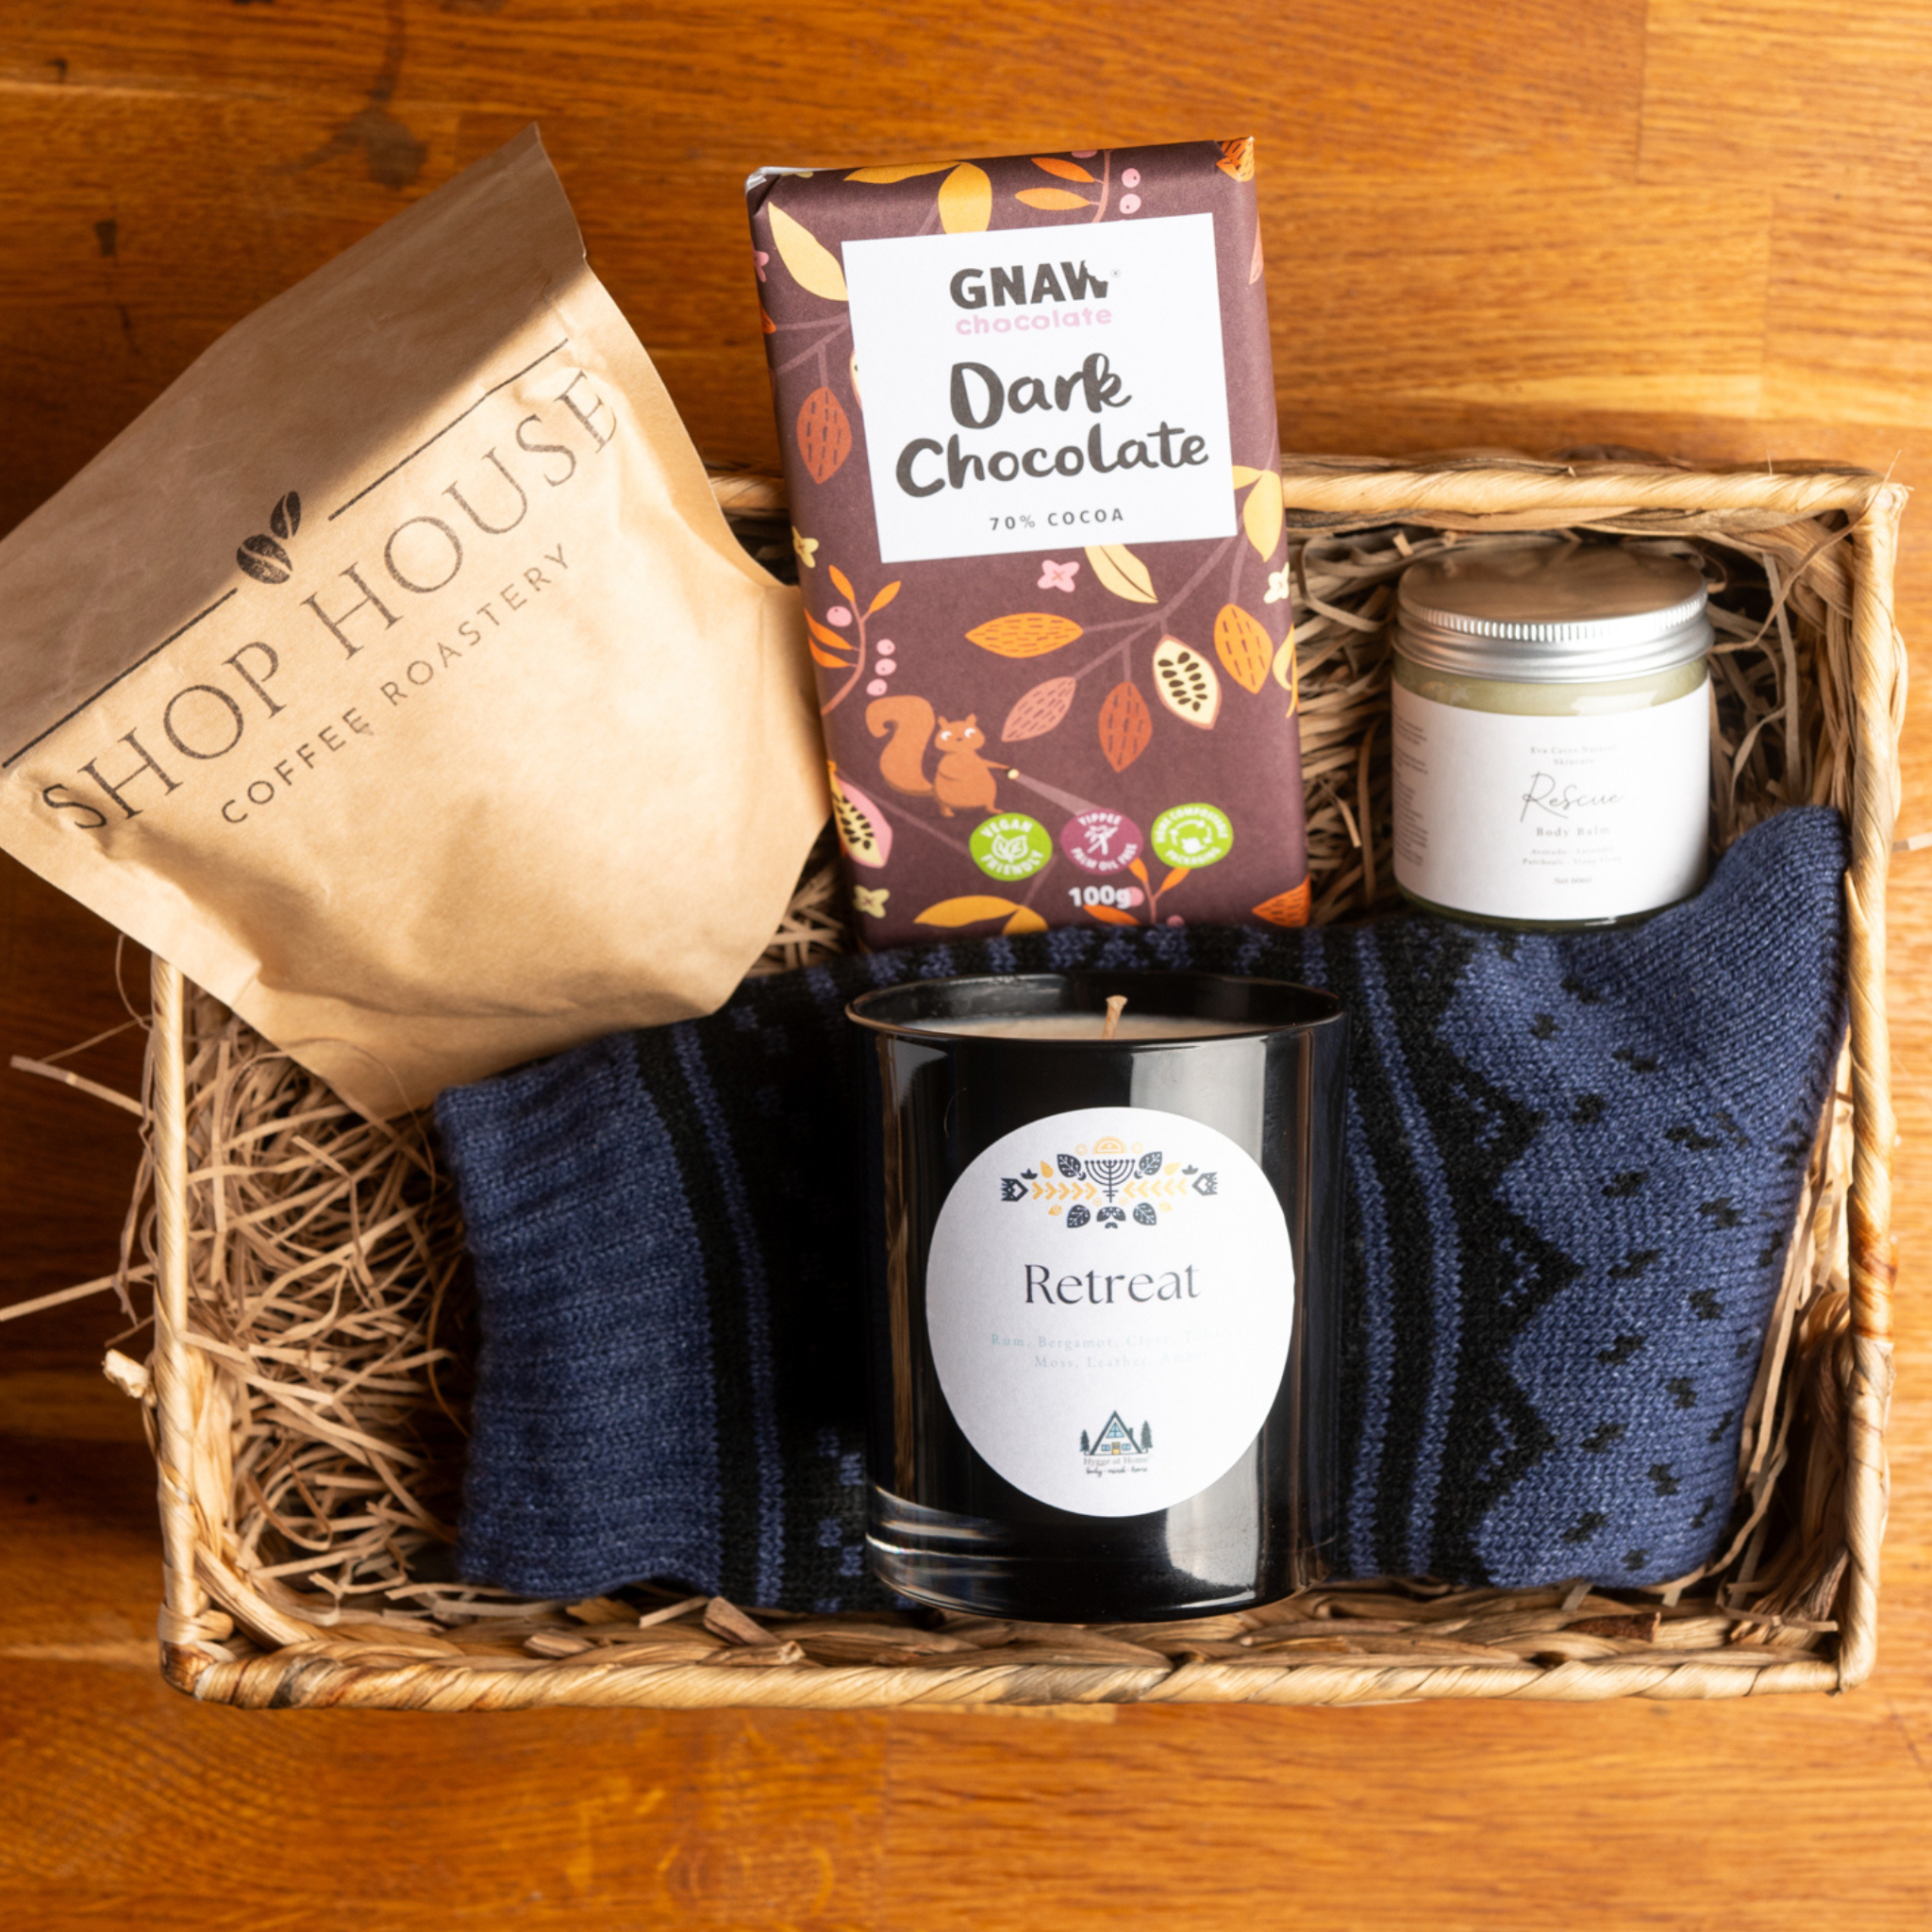 Hygge Personalized Gift Box for Men